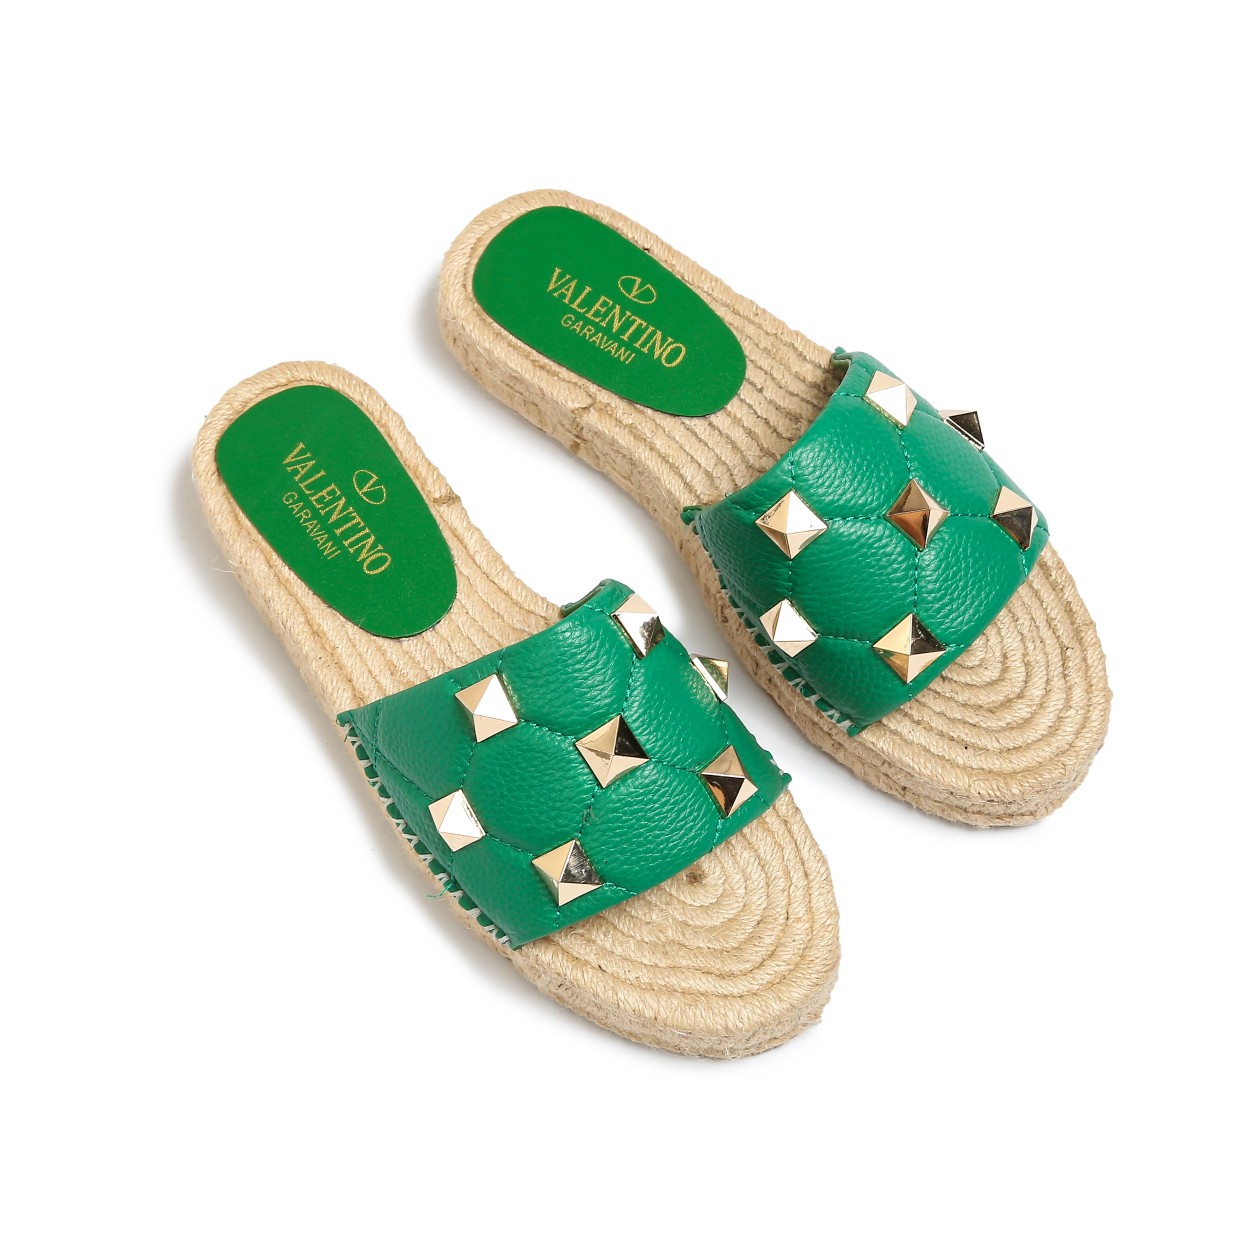 Ah Valentino (Valentino) new fisherman slippers, four colors available, sizes 35-43